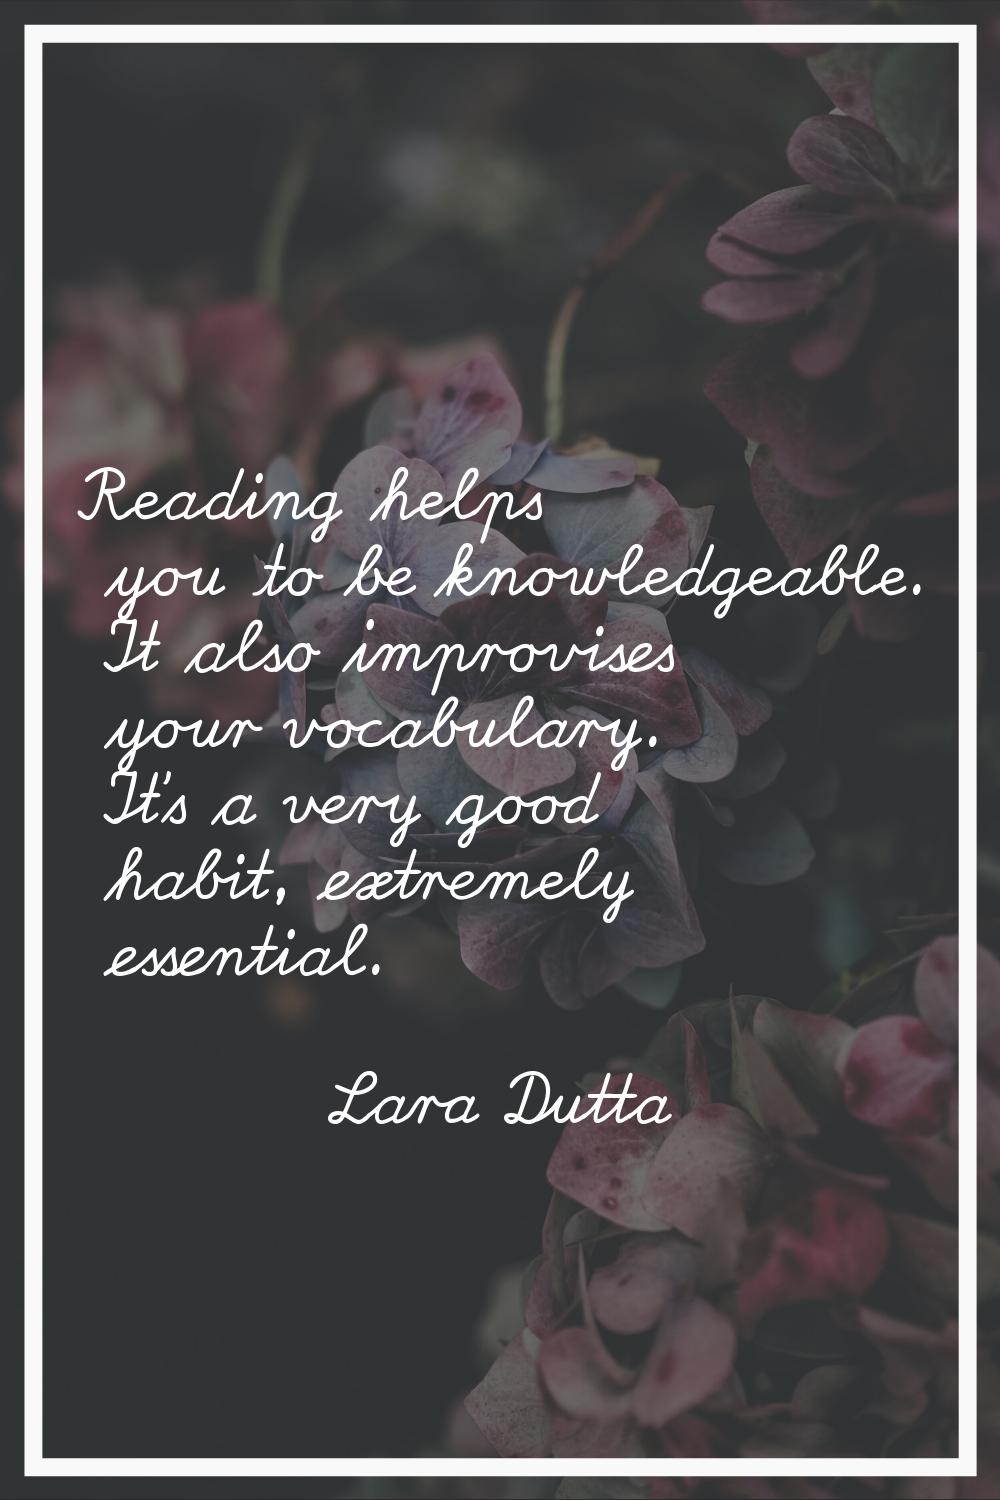 Reading helps you to be knowledgeable. It also improvises your vocabulary. It's a very good habit, 